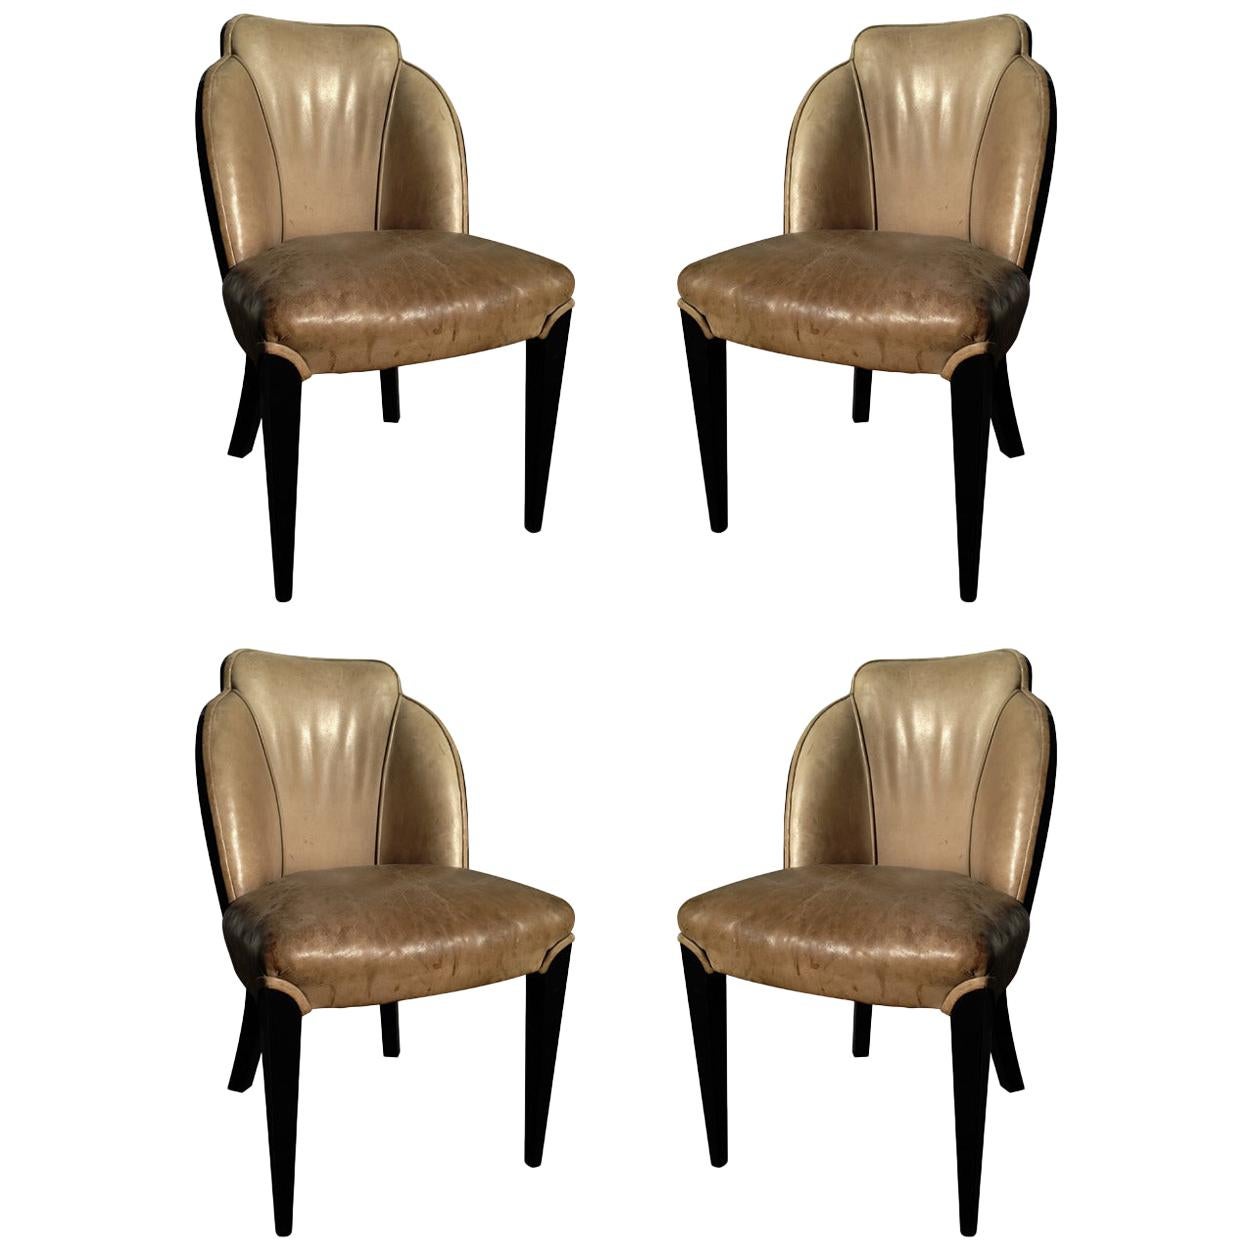 Two Pairs of Period Art Deco Ebonized Side Chairs